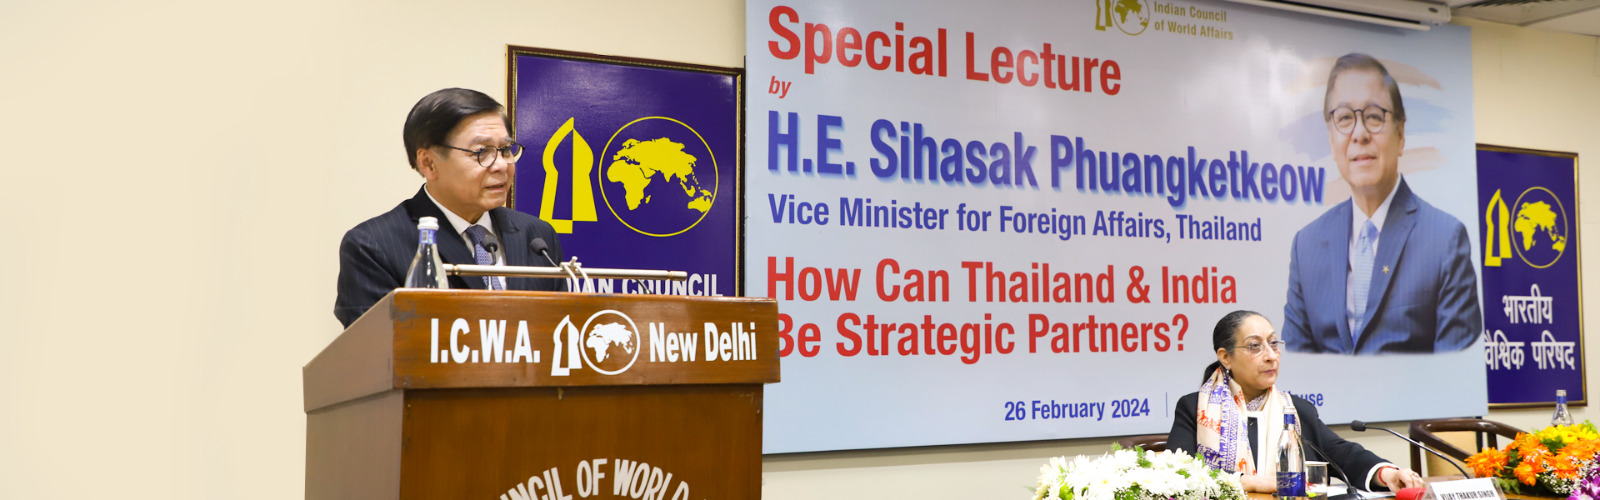 H.E. Sihasak Phuangketkeow, Vice Minister for Foreign Affairs, Thailand delivered Special Lecture on  ‘How Can Thailand & India Be Strategic Partners’ at Sapru House, 26 February 2024